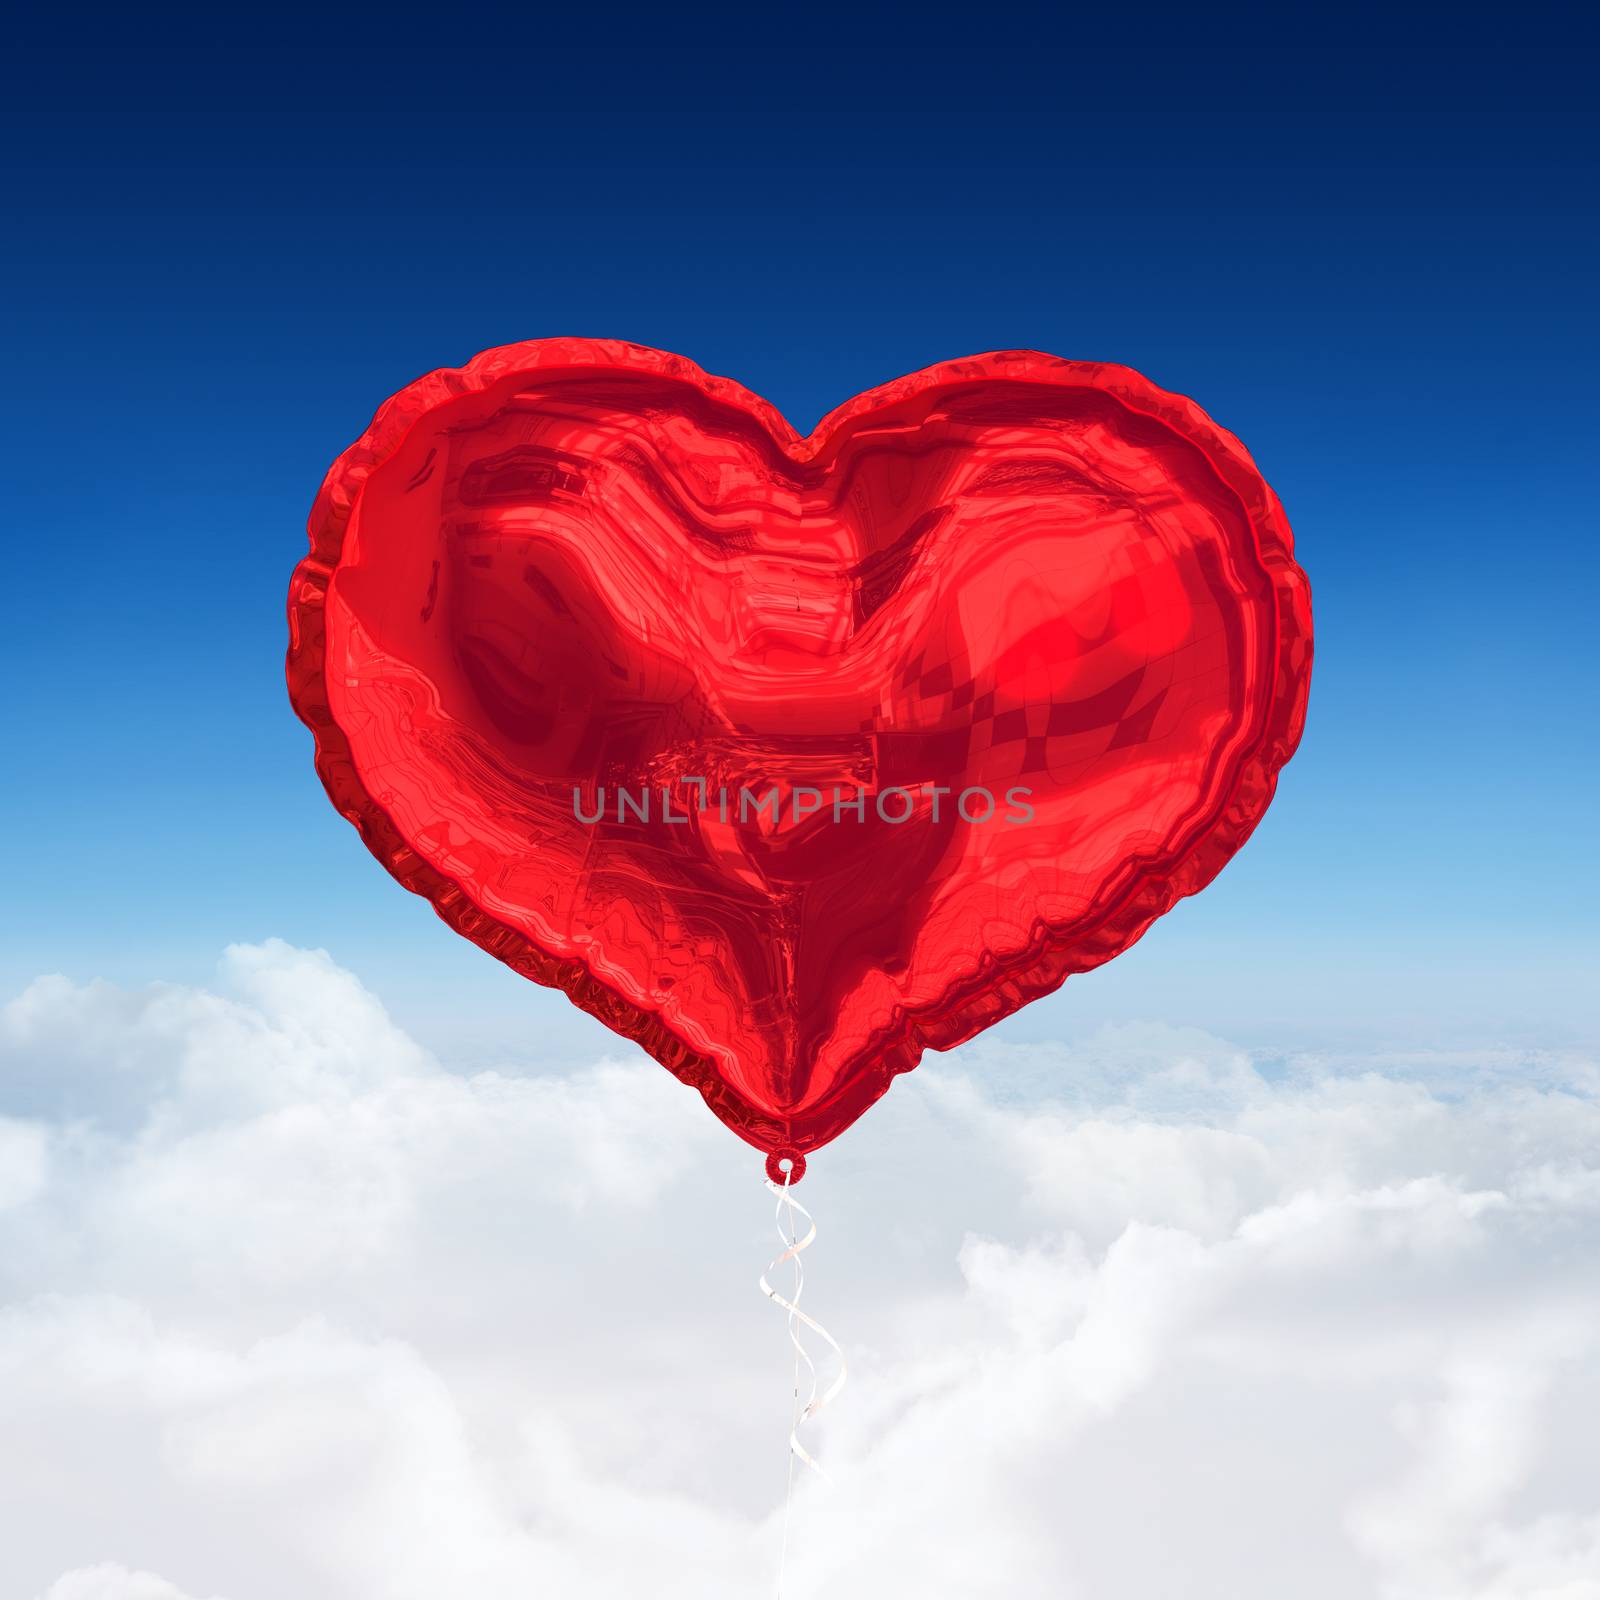 Red heart balloon against blue sky over clouds